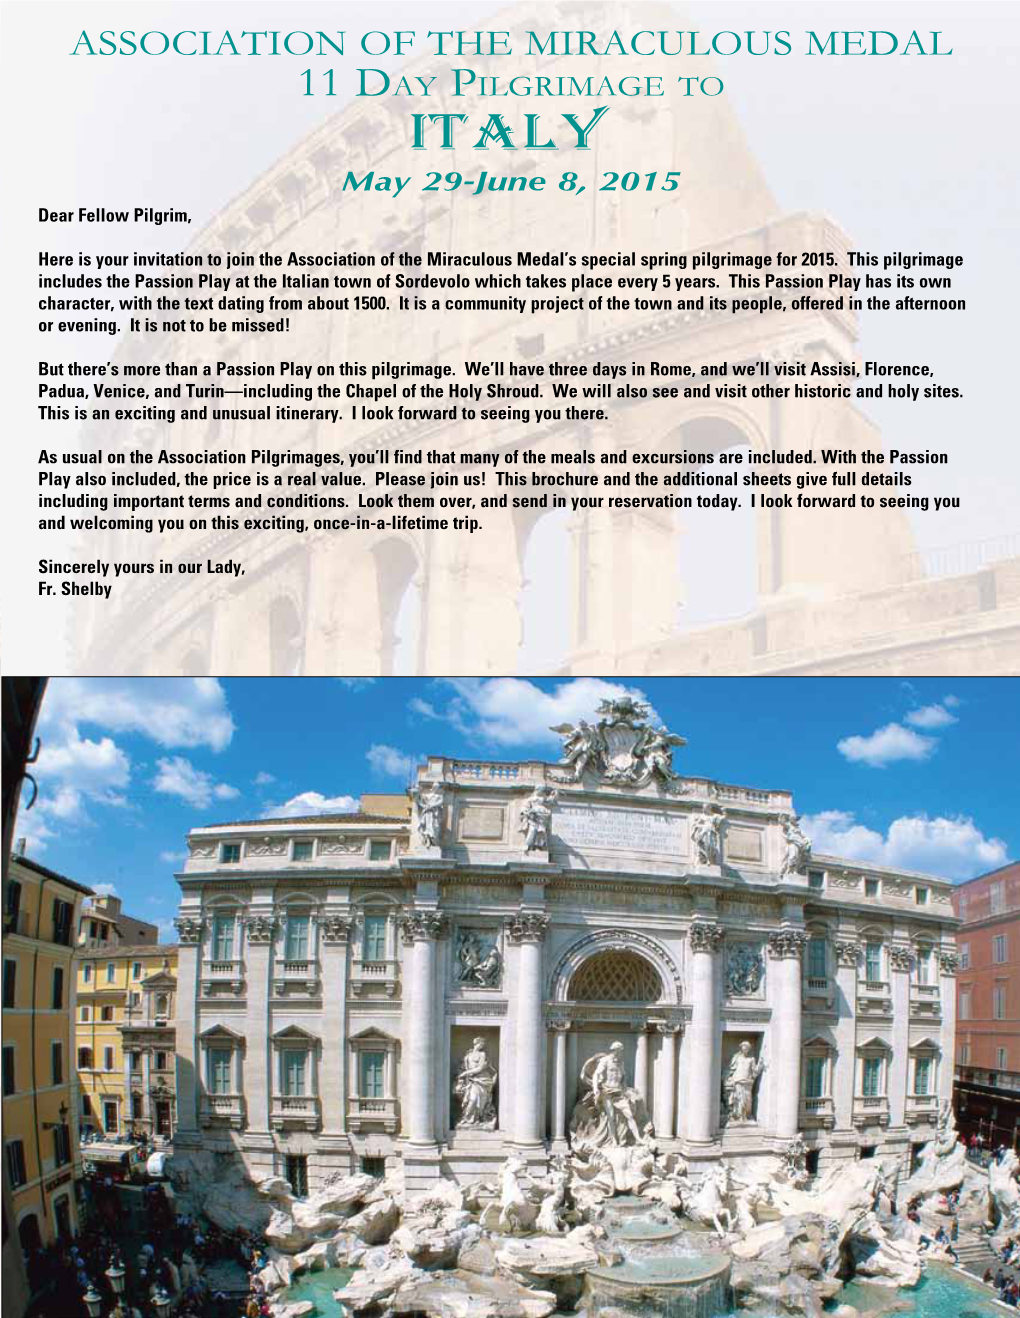 Read the 2015 Spring Pilgrimage to Italy Brochure